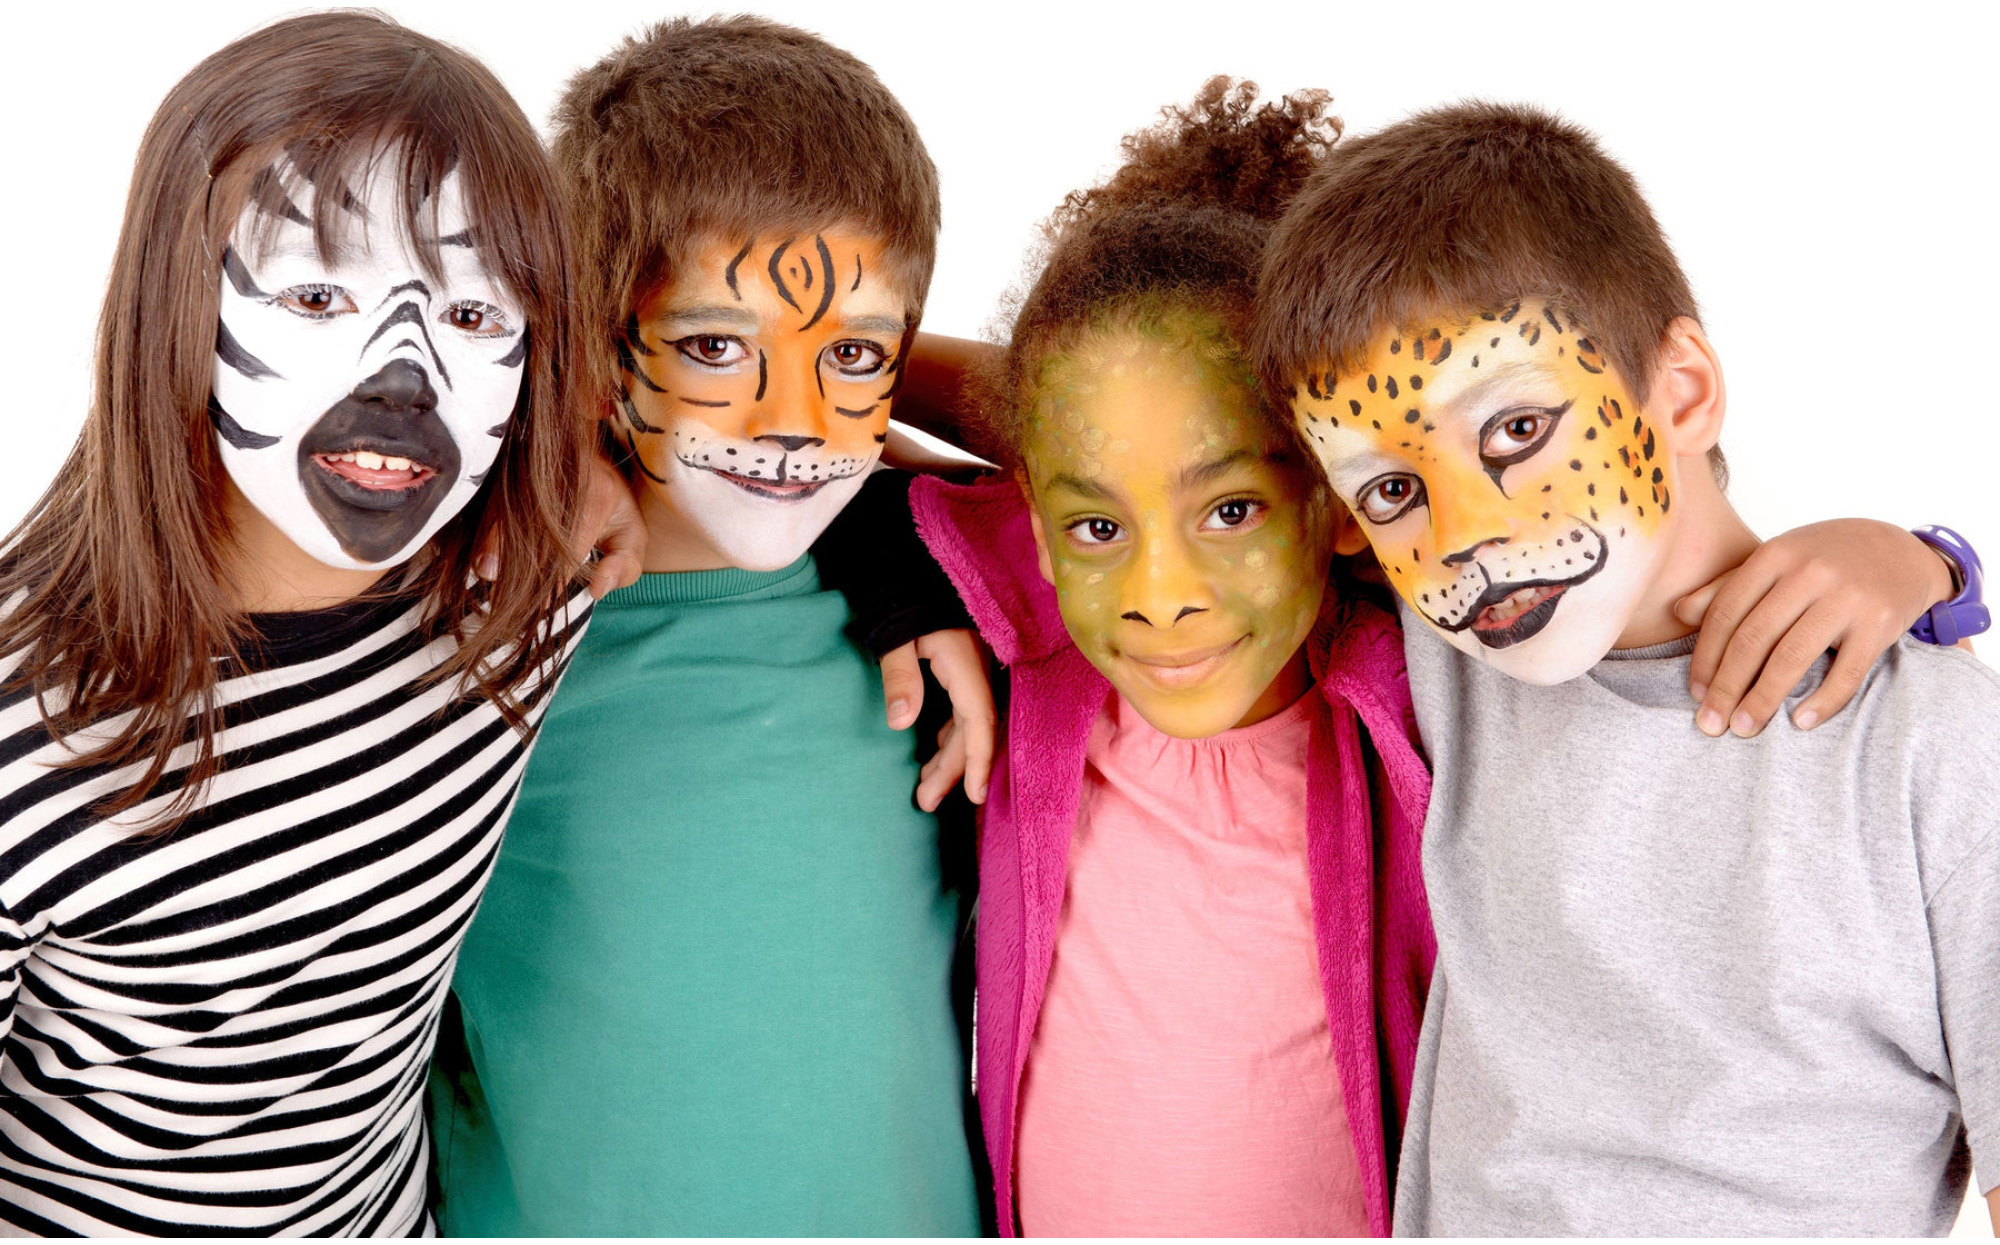 Face Paint Sticks (Set of 12) – Play Therapy Toys: Dress Up